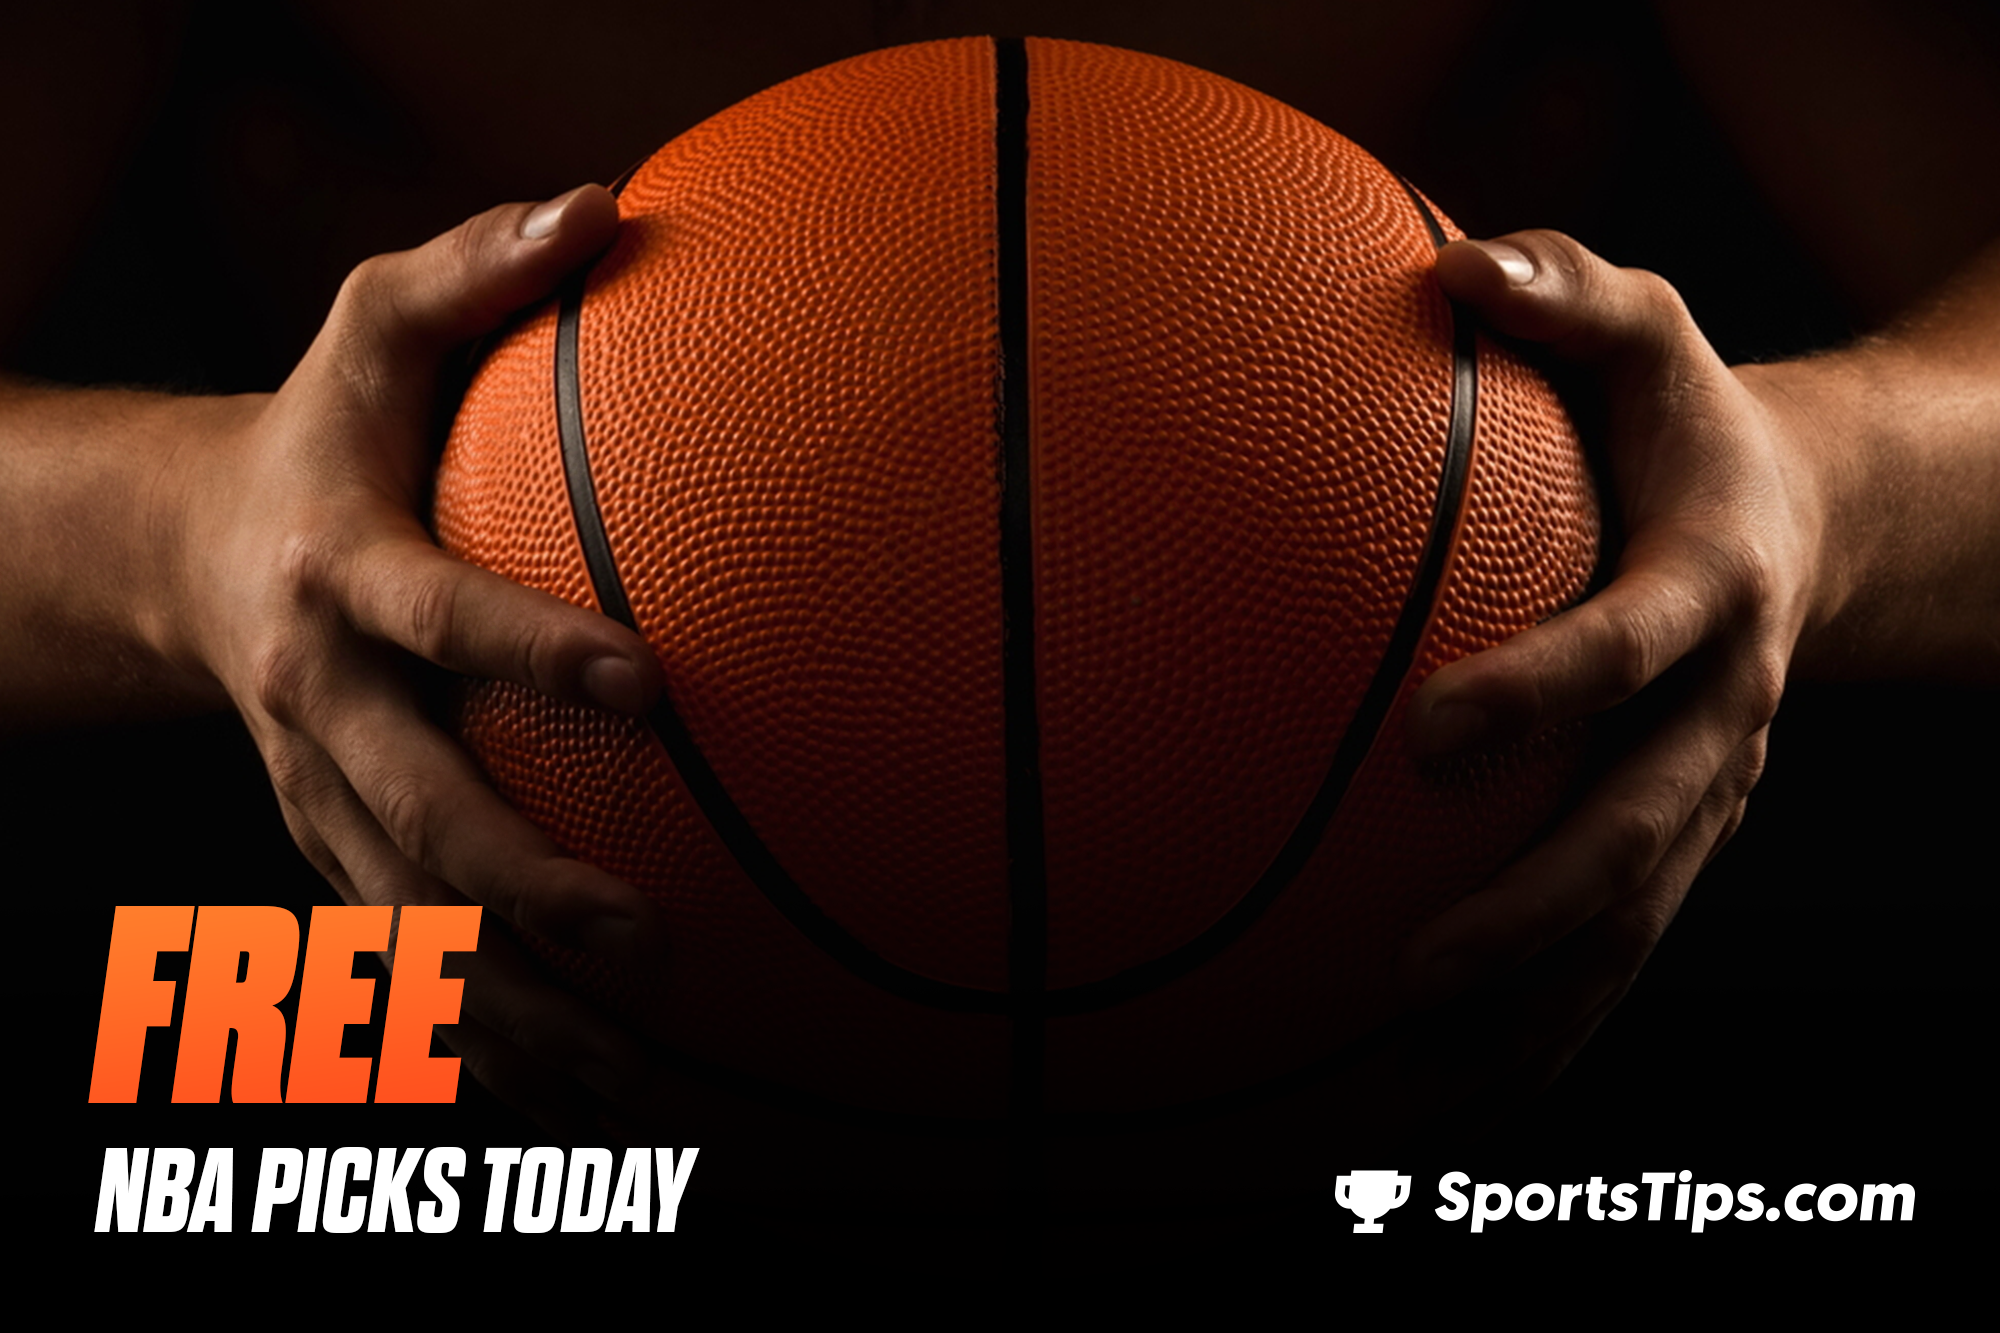 Free NBA Picks Today for Sunday, April 10th, 2022